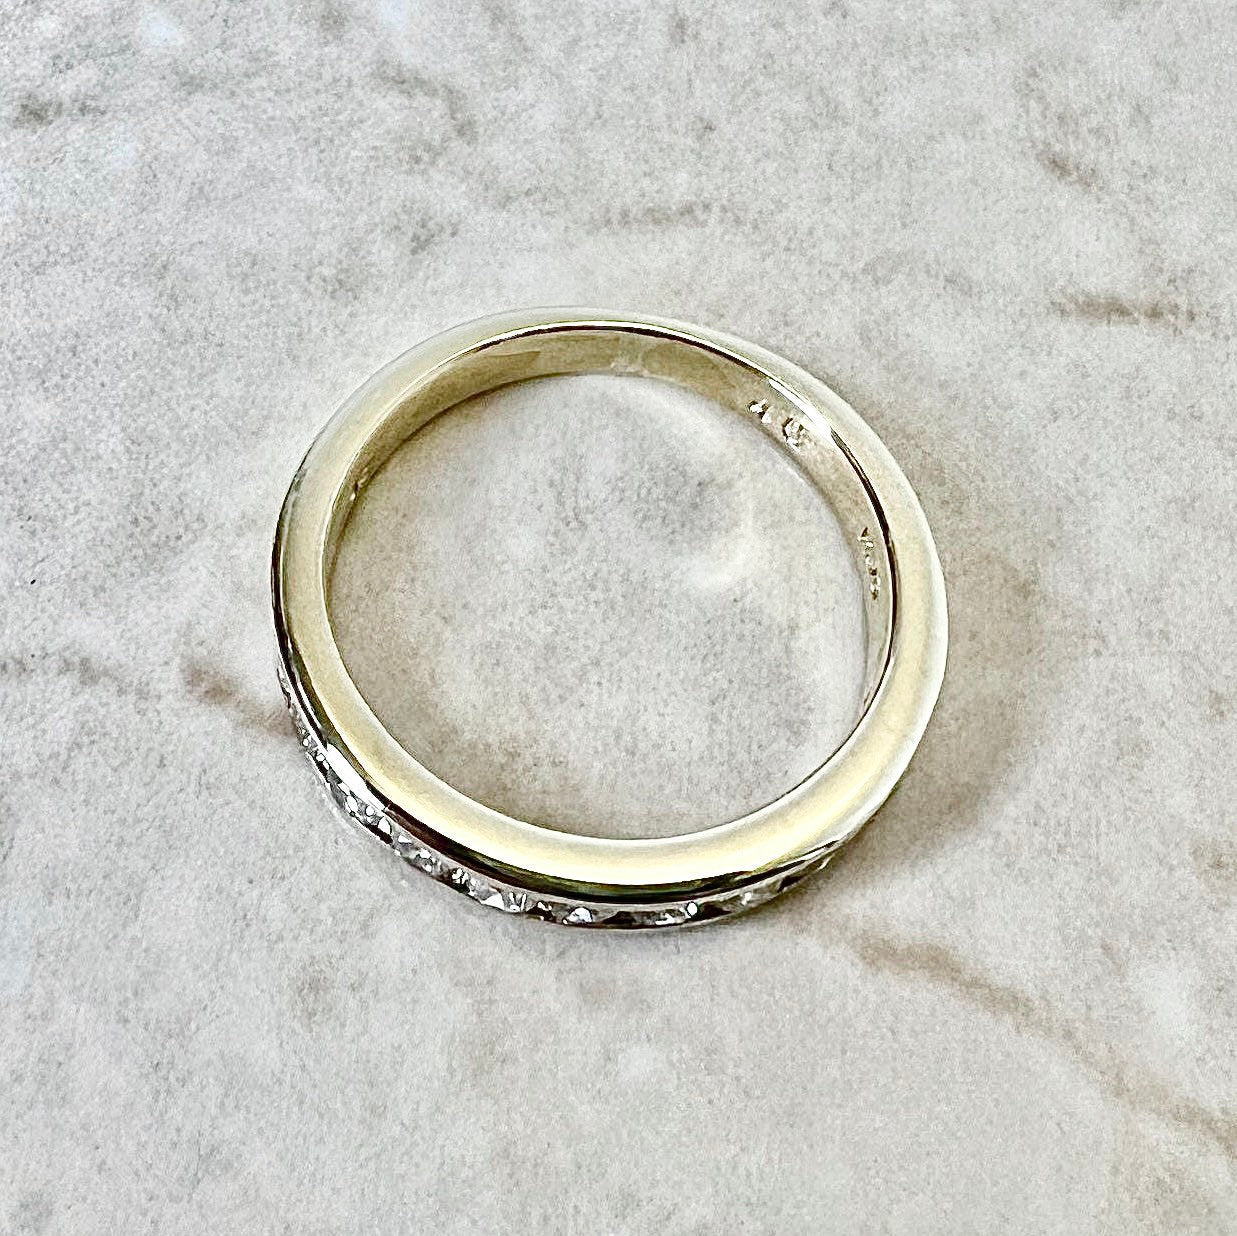 14K Half Eternity Diamond Band Ring 0.30 CTTW - Yellow Gold Eternity Ring - Anniversary Ring - Wedding Ring - Size 4.75 US - Holiday Gift